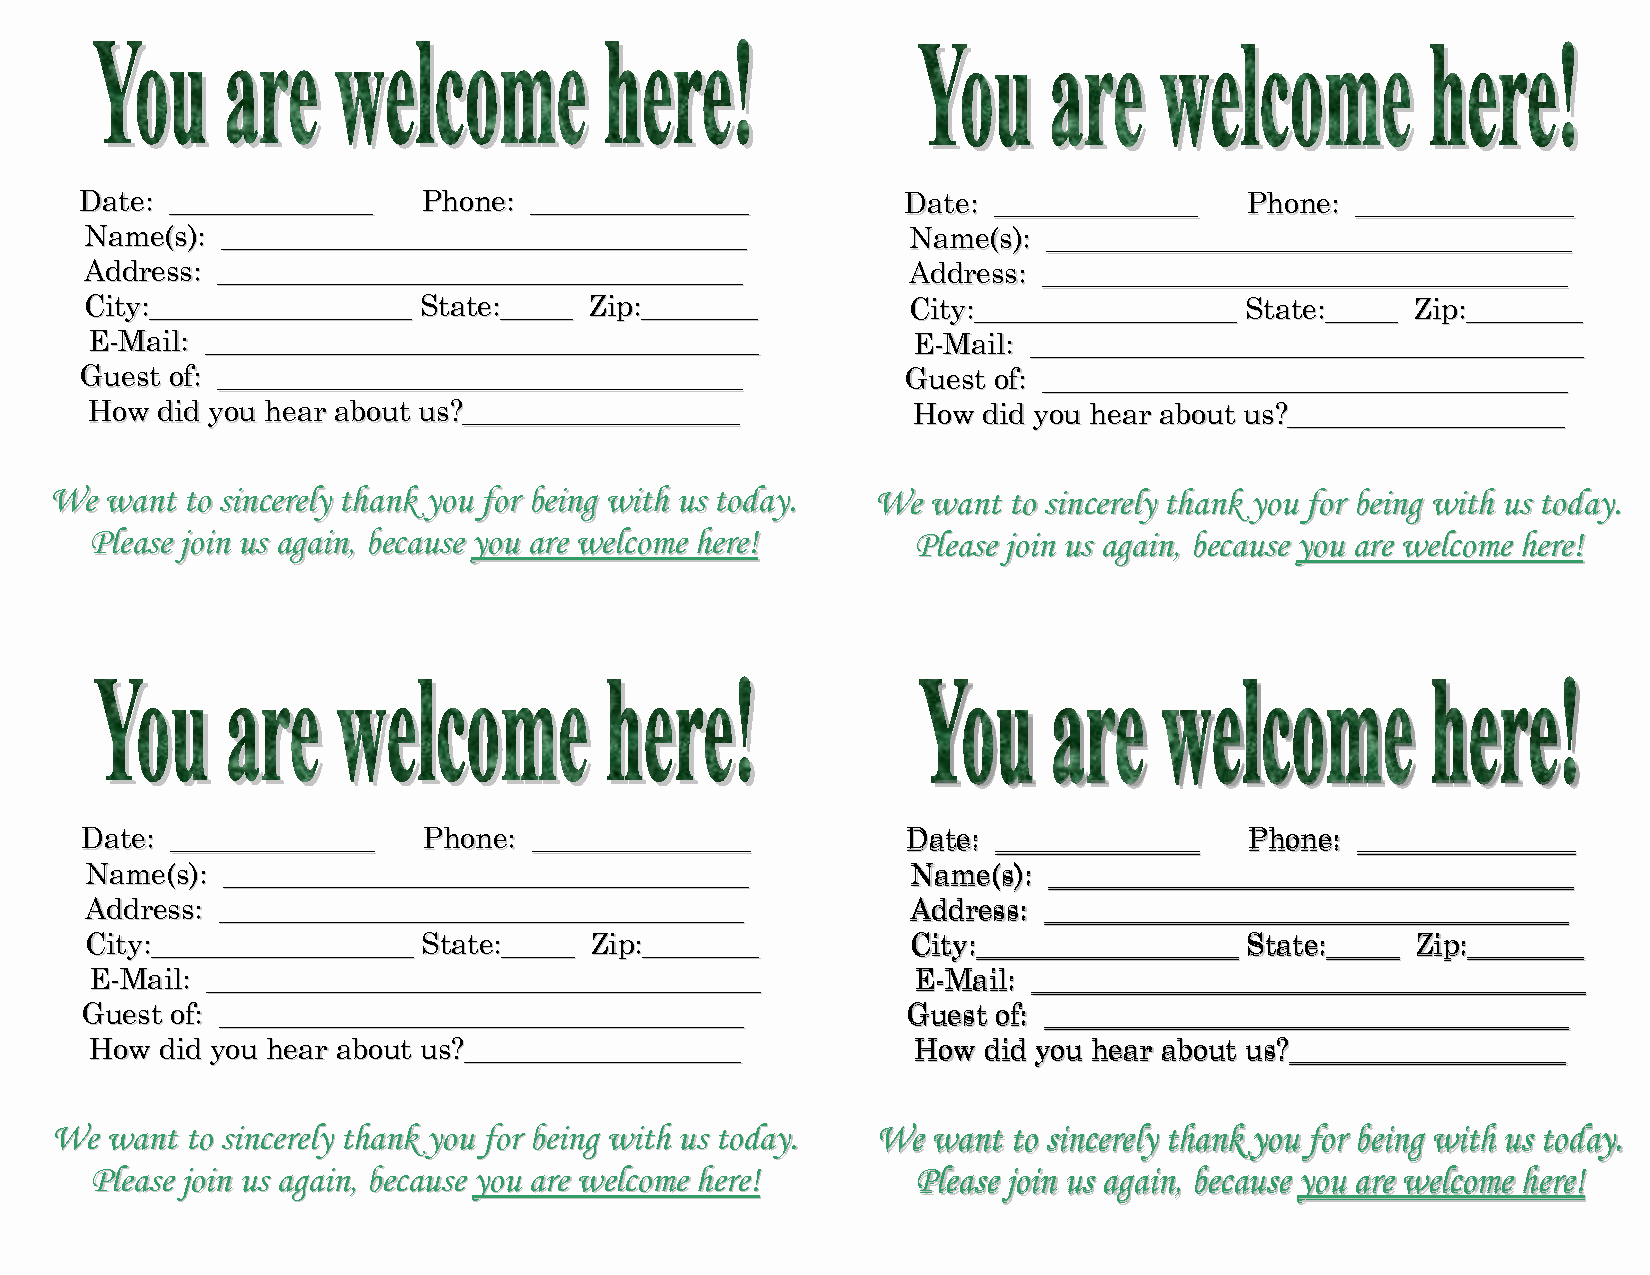 Free Printable Welcome Cards Download Example - Tduck.ca - Free Printable Welcome Cards